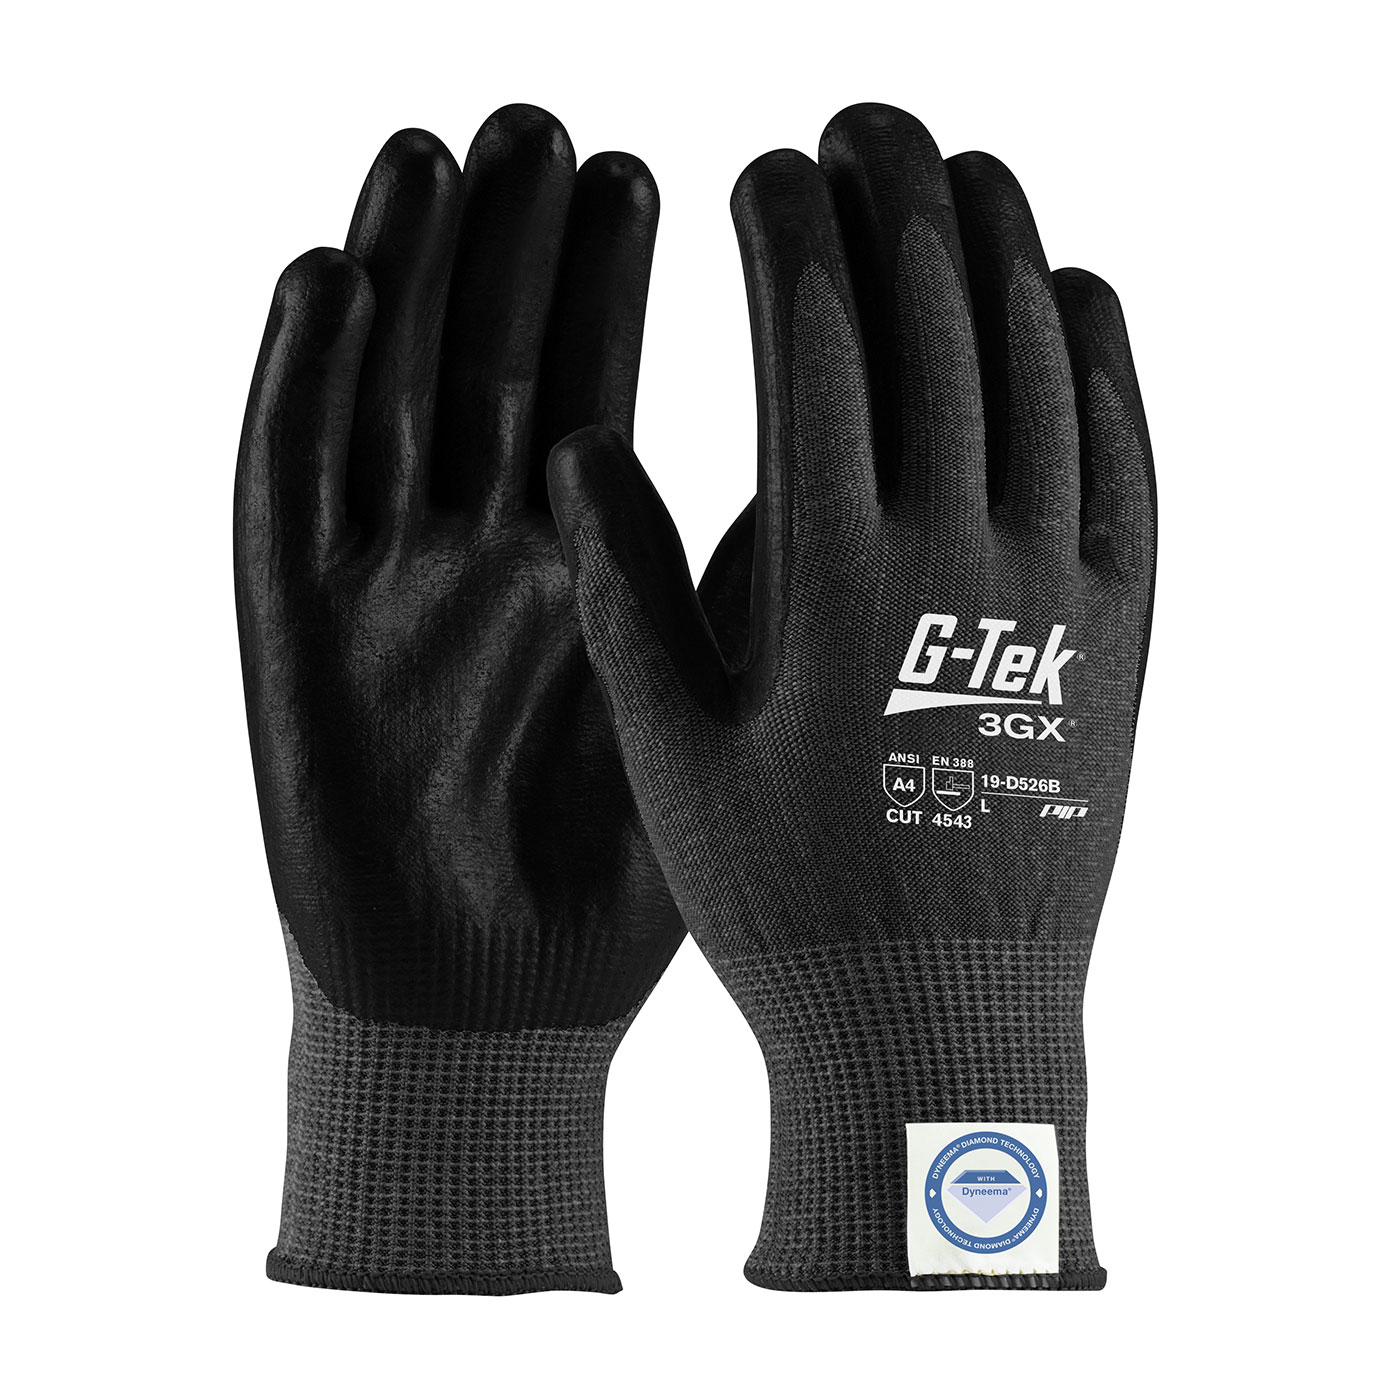 19-D526B PIP®G-Tek®3 gx®黑色无缝针织达因ema® Diamond Blended Glove with Polyurethane Coated Smooth Grip on Palm & Fingers - Touchscreen Compatible